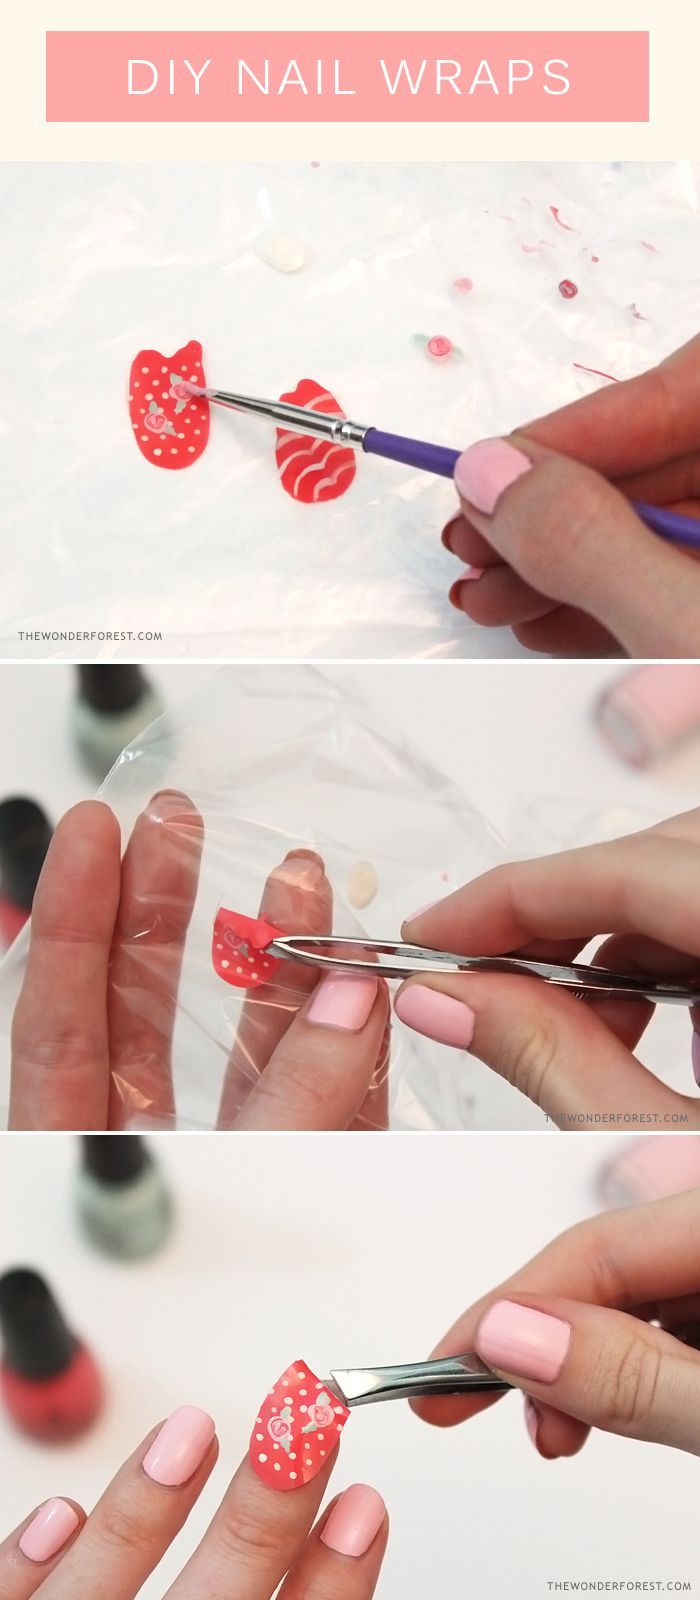 18 diy projects Awesome nail polish ideas